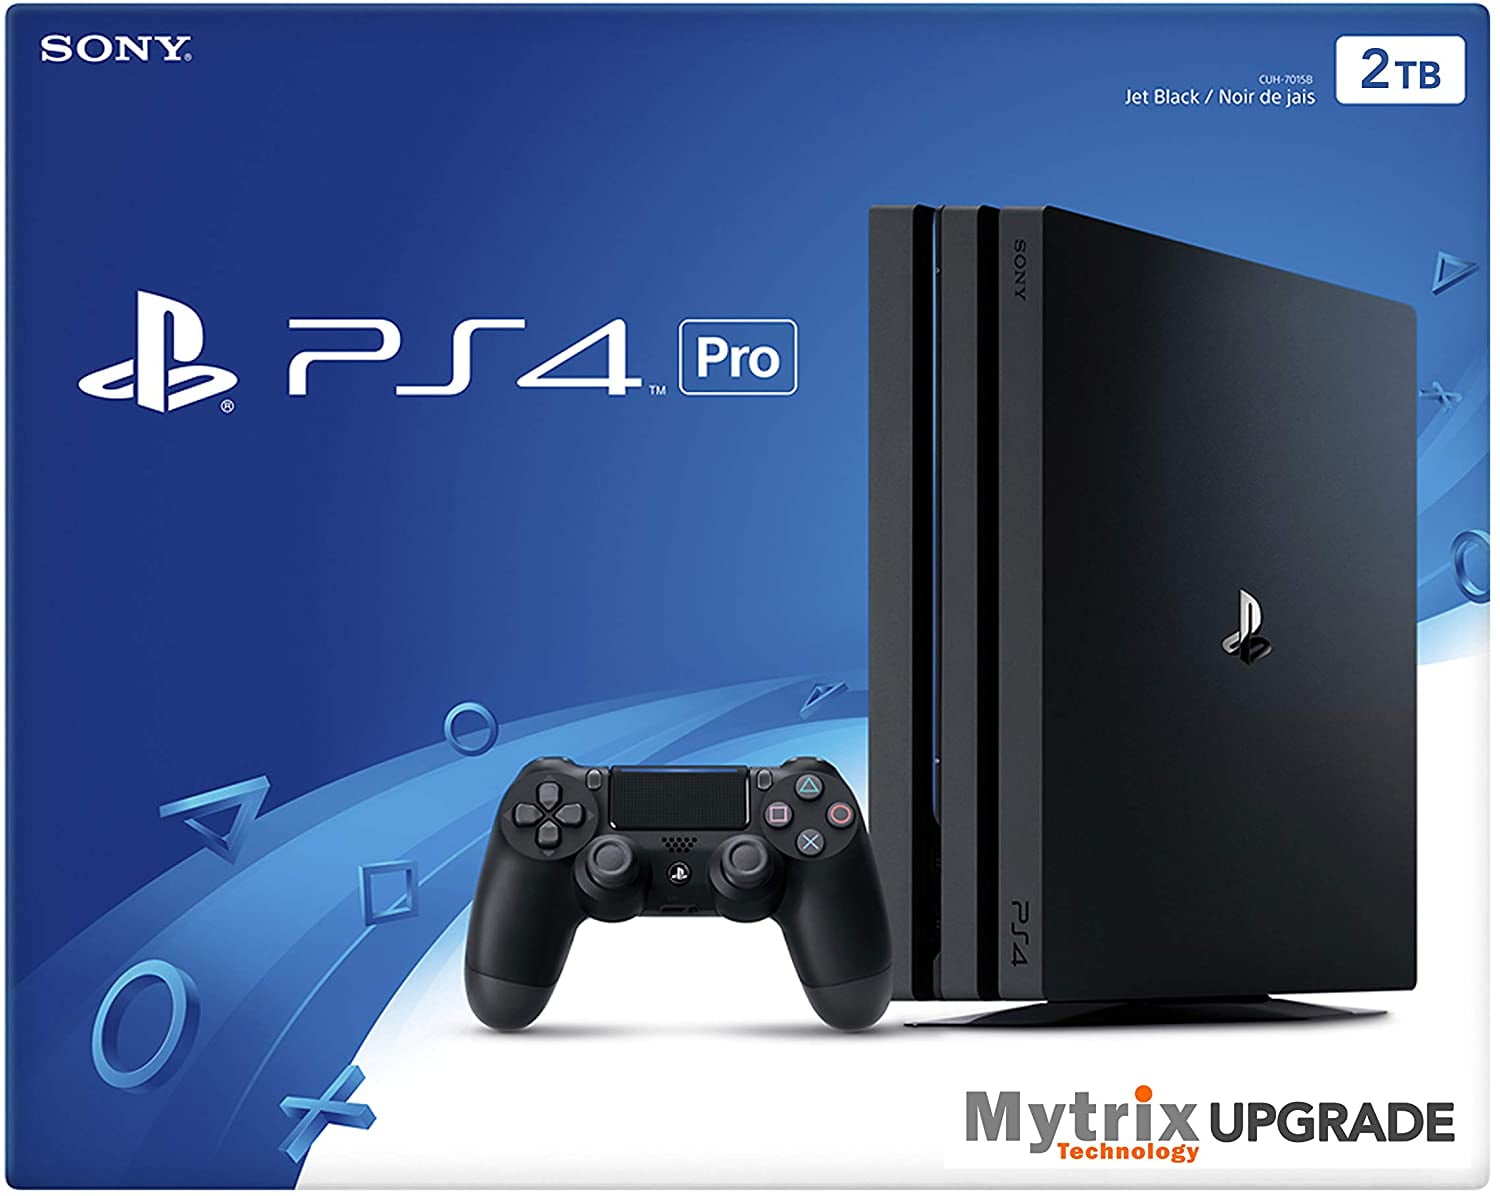 Mytrix Playstation 4 Pro 2TB Console with DualShock Wireless Controller Bundle, PS4 Pro Enhanced by Mytrix - Walmart.com